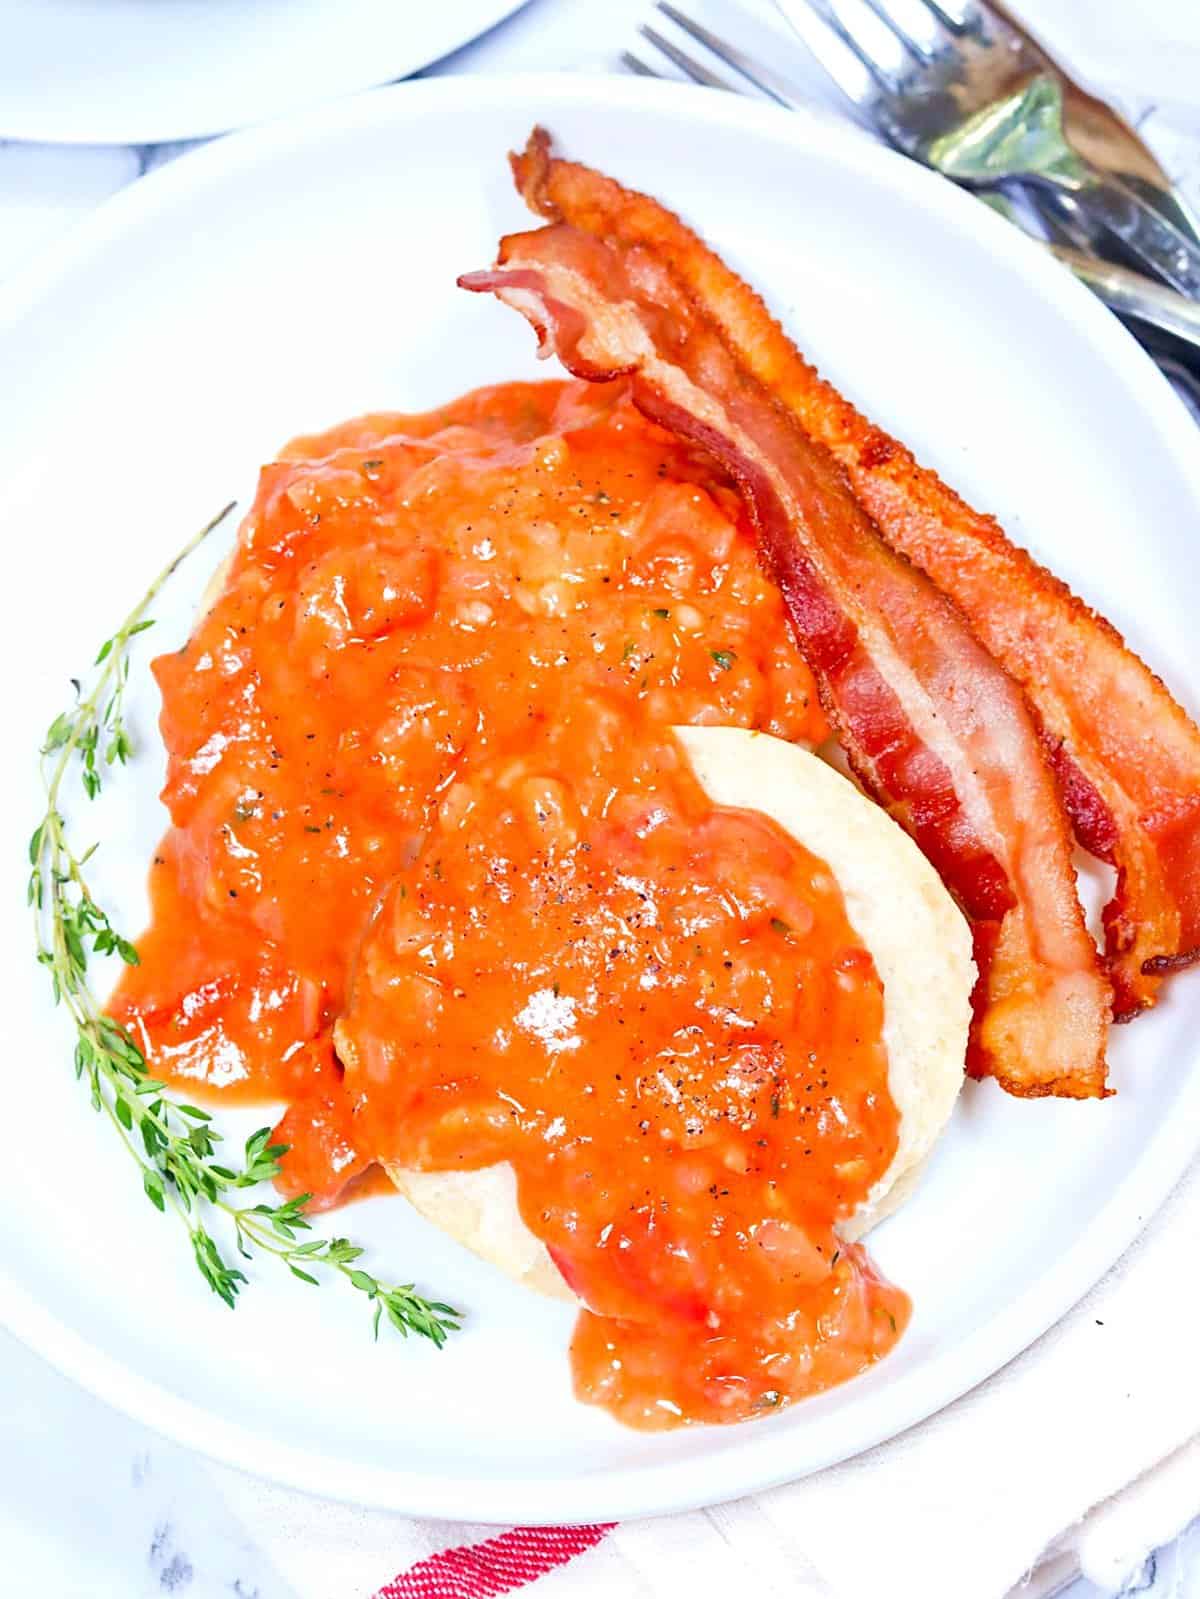 Delectable tomato gravy over biscuits with a side of bacon